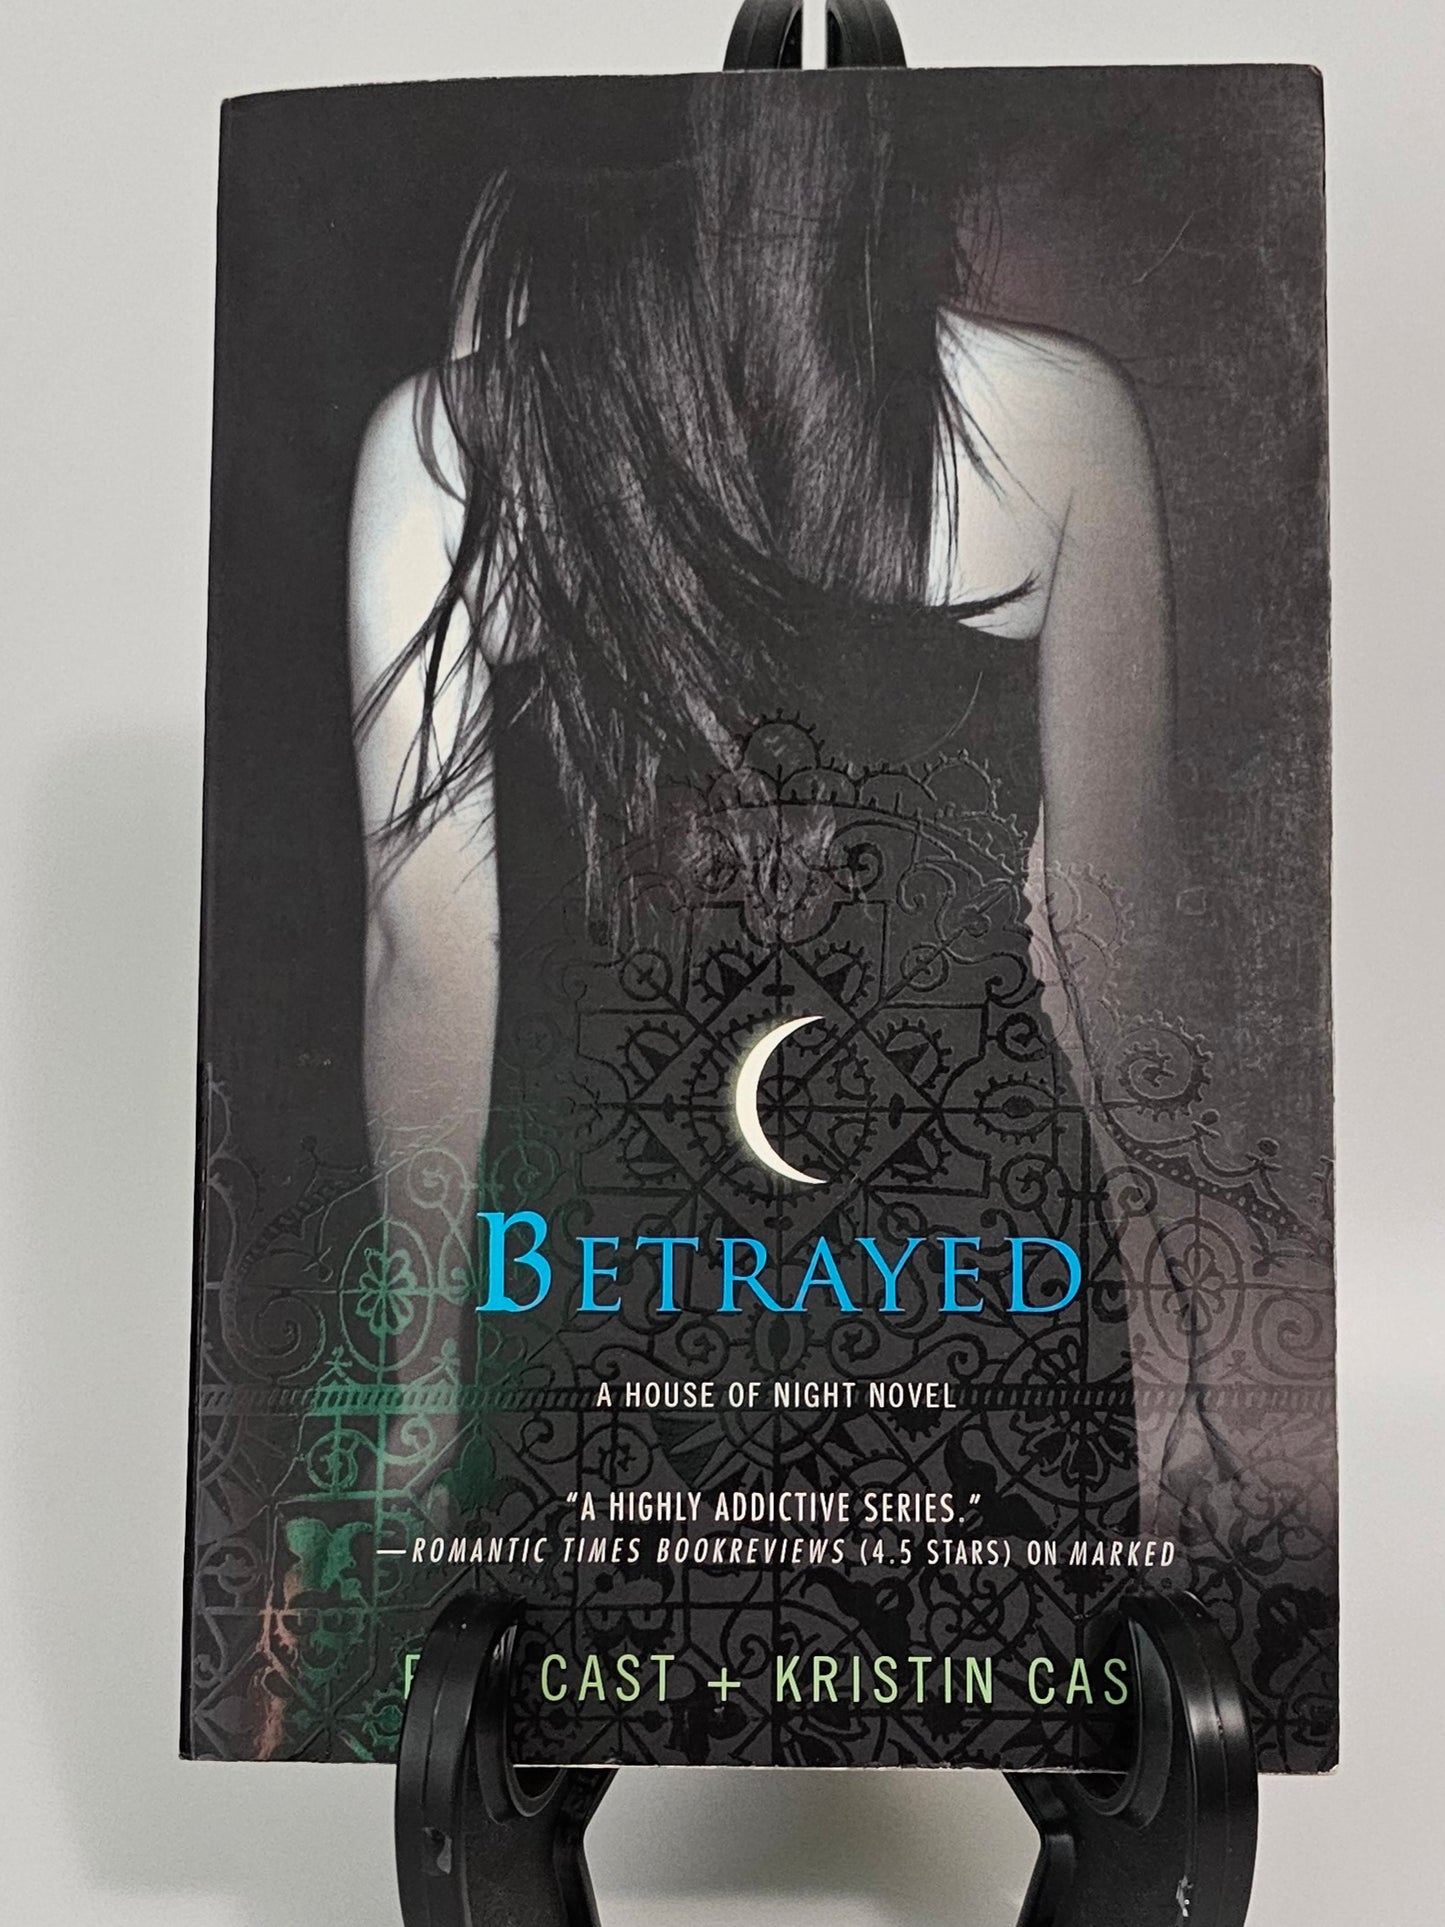 Betrayed by P.C. Cast + Kristin Cast (House of Night Series #2)